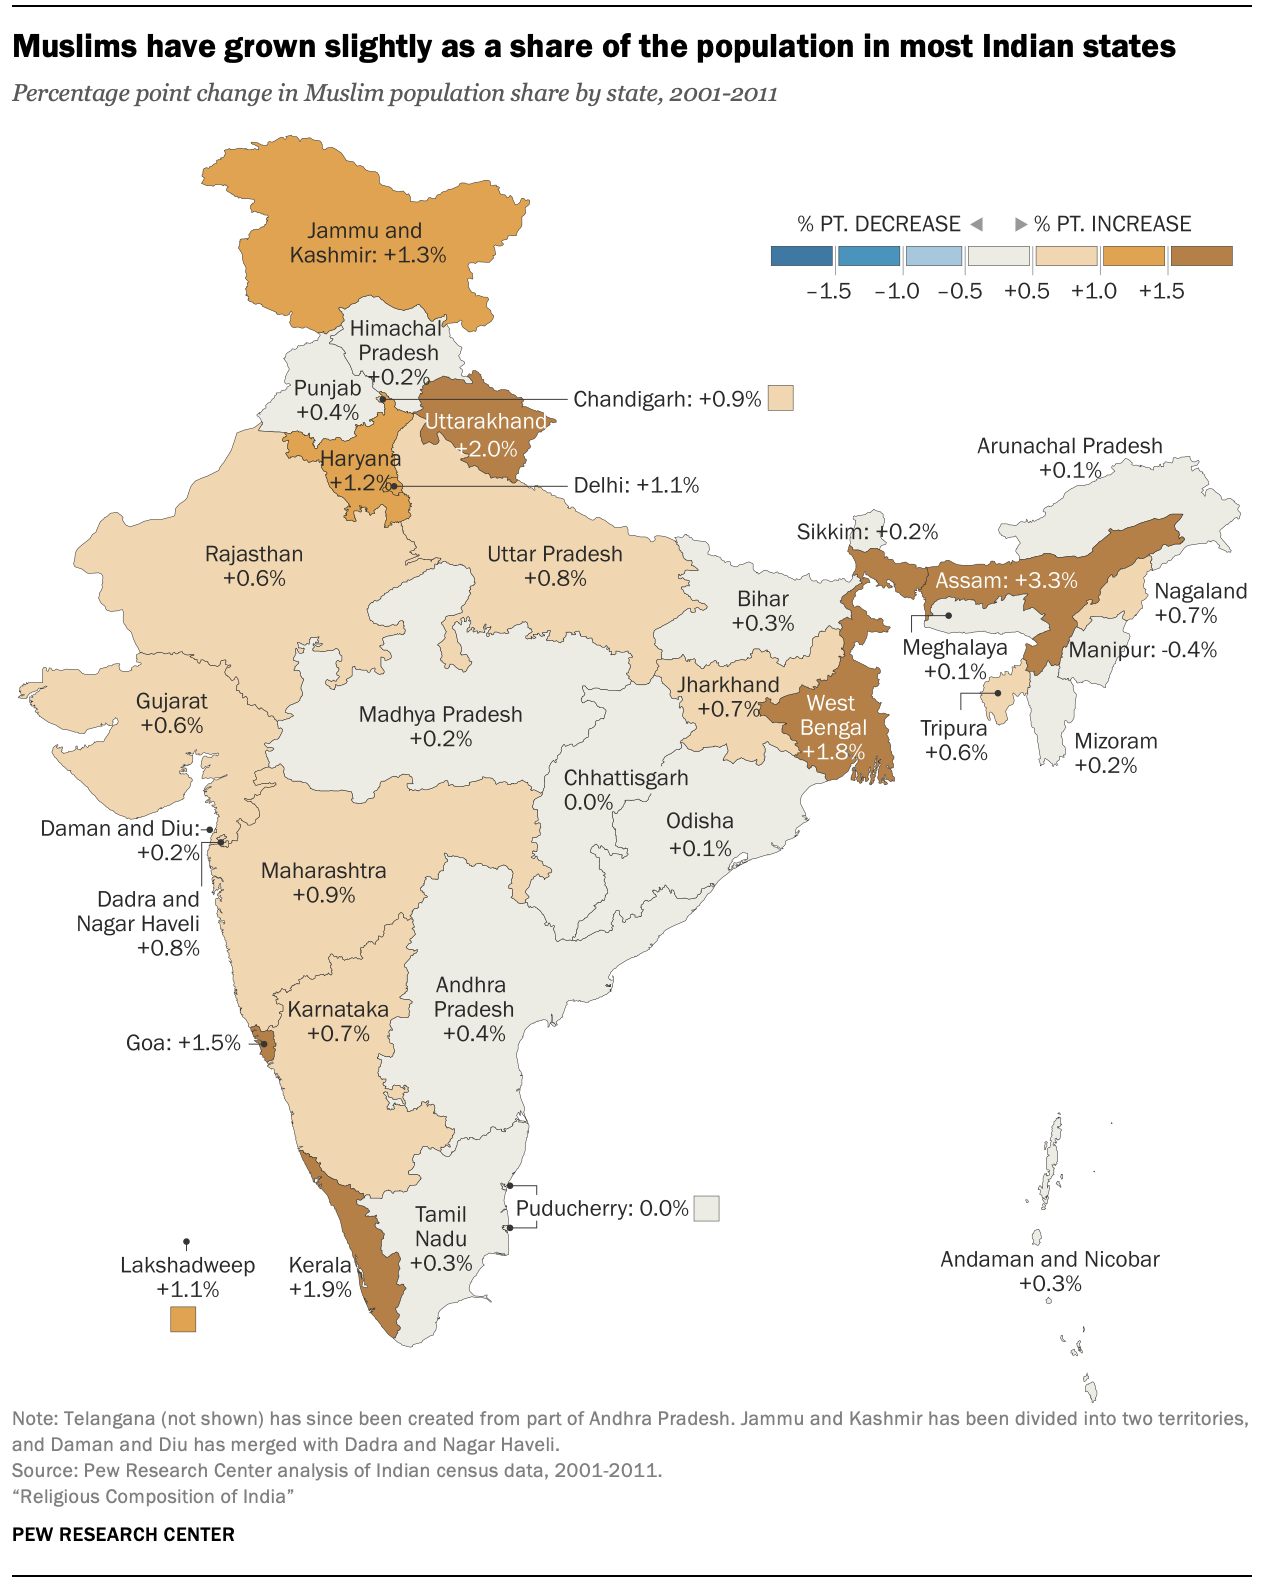 Religious demography of Indian states and territories Pew Research Center